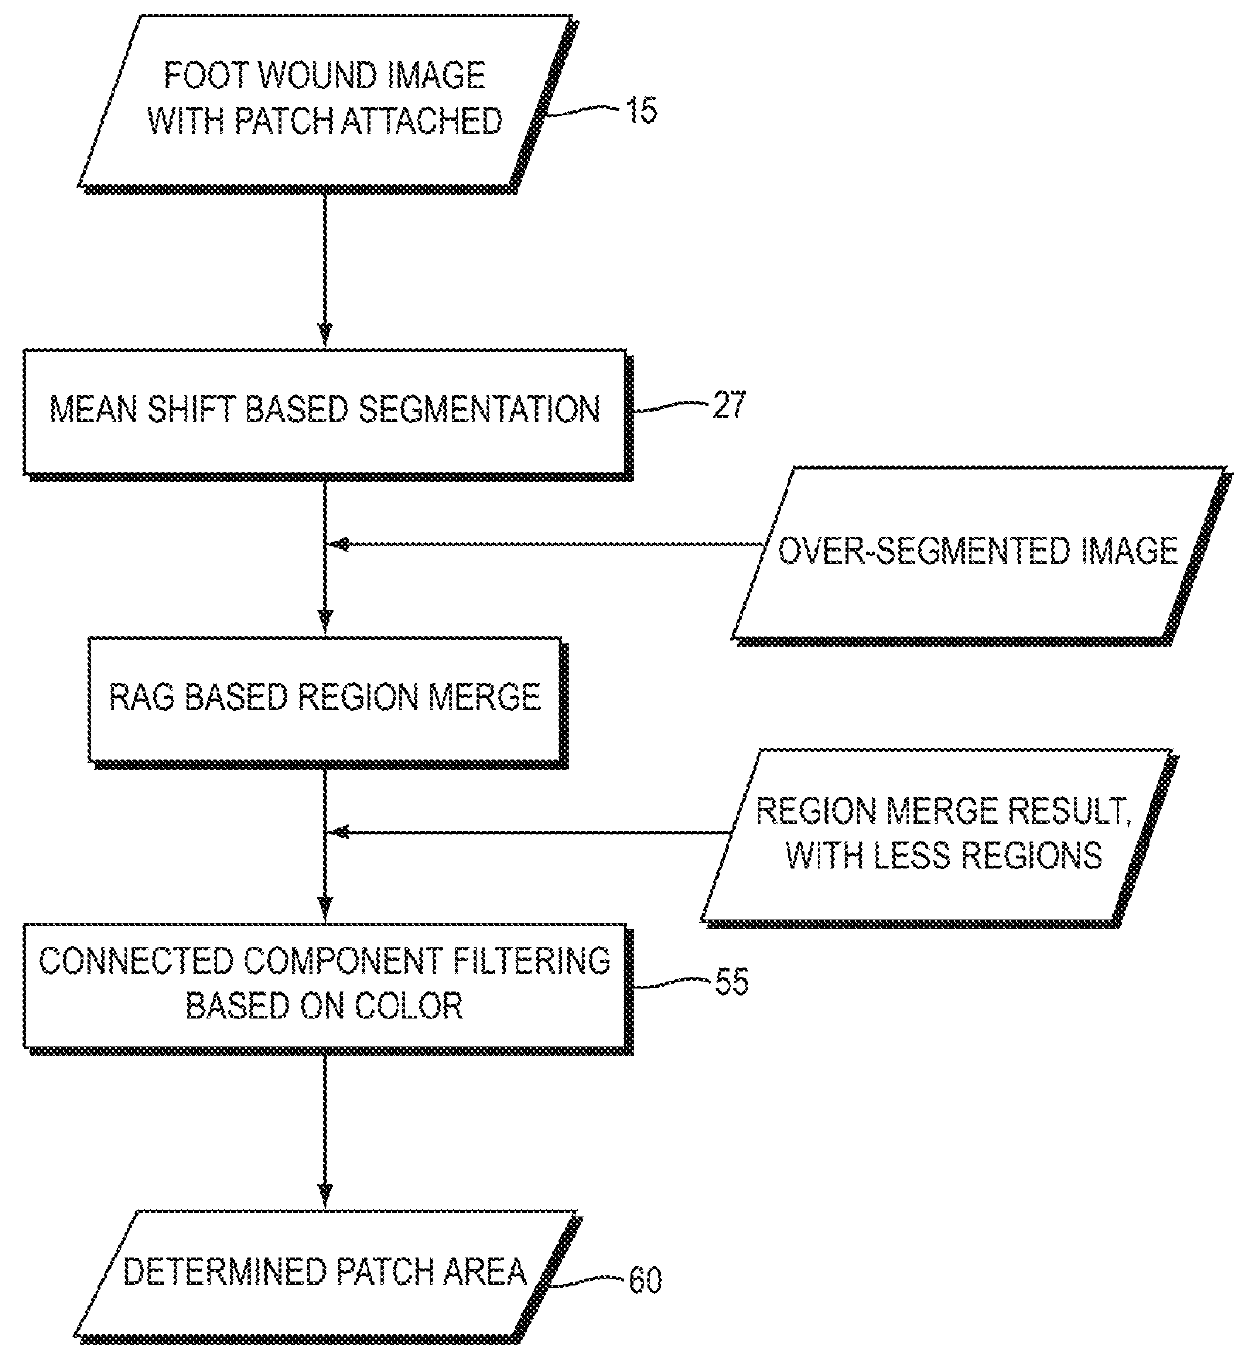 System and method for assessing wound